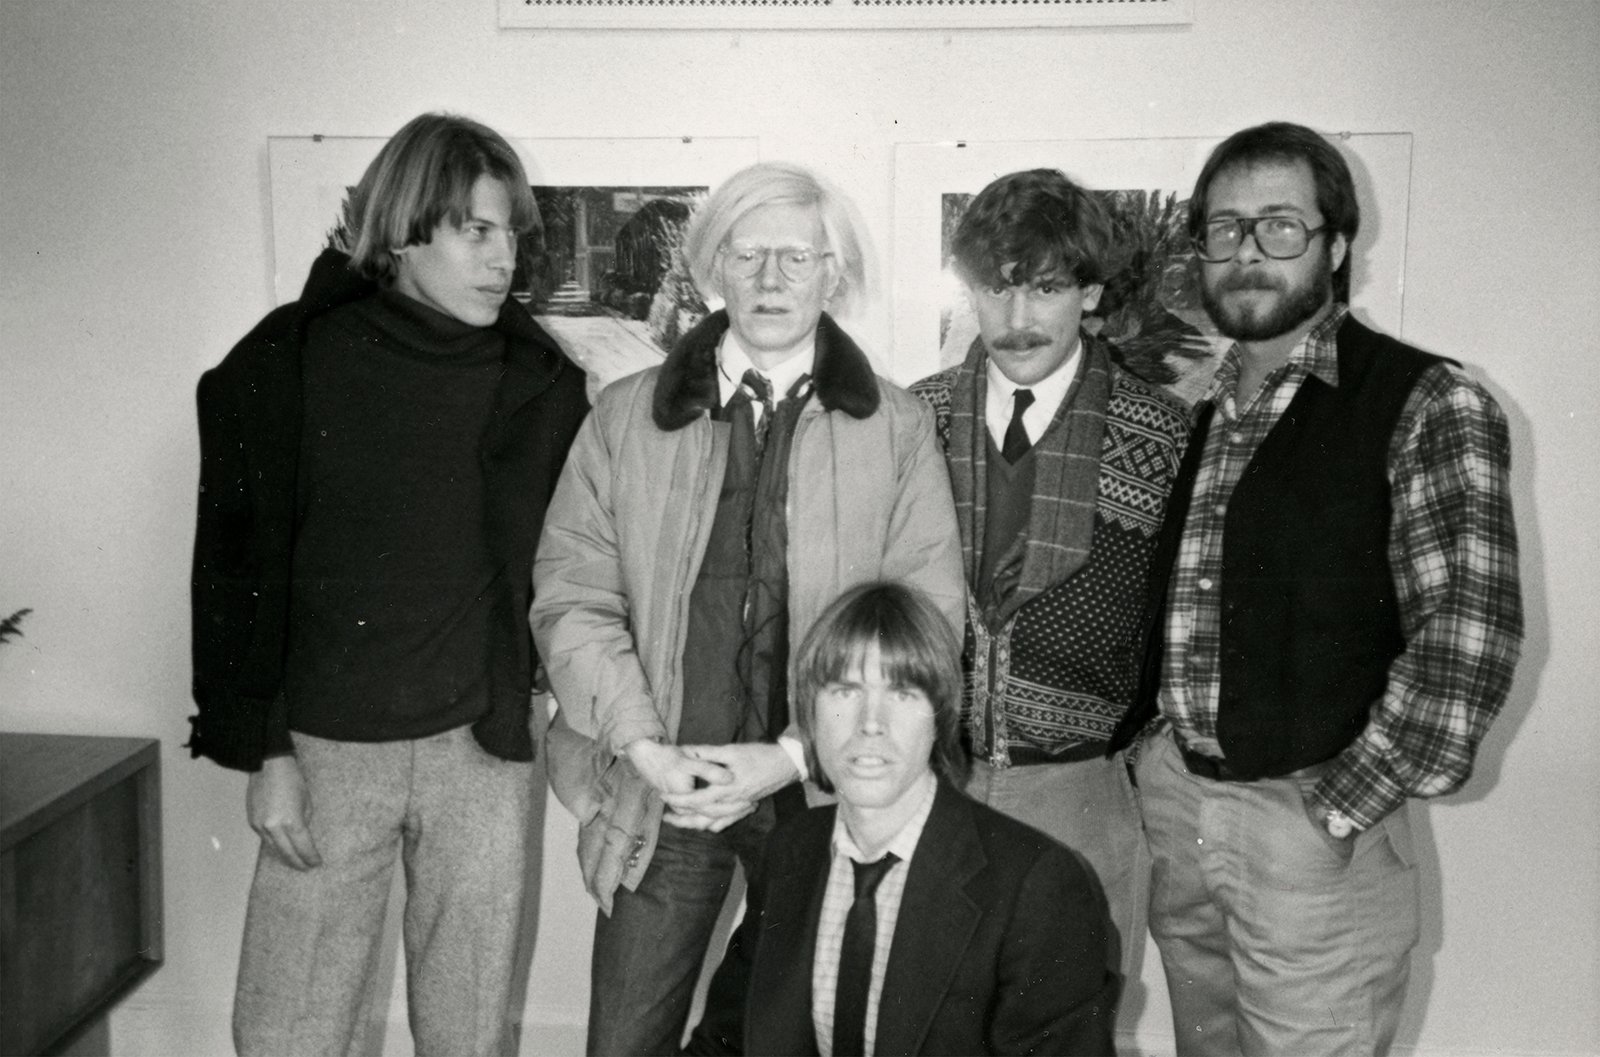 Artists Howard Carr, Andy Warhol, Peter Wise and Martin Kotler, with Chris Murray (front), at the launch of Peter Wise’s exhibition at the Govinda Gallery, 1984.